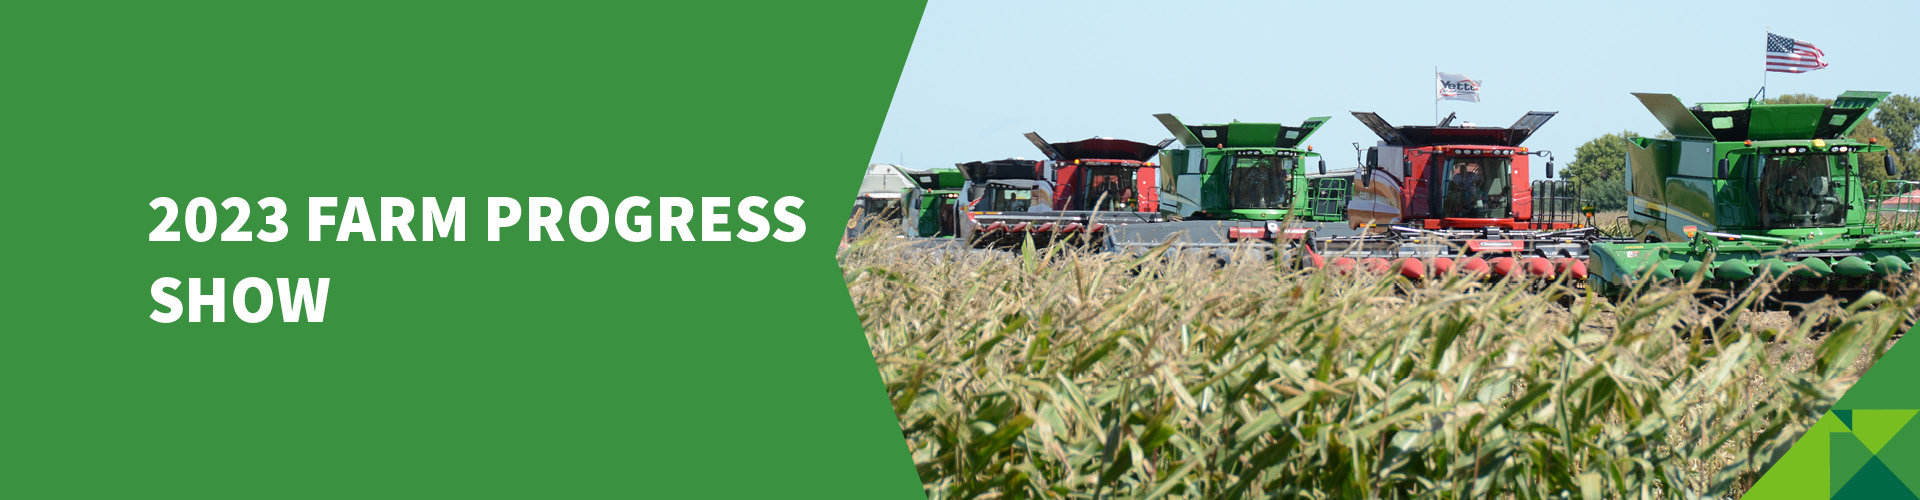 Farm Progress Show For Farming and Agricultural Implements